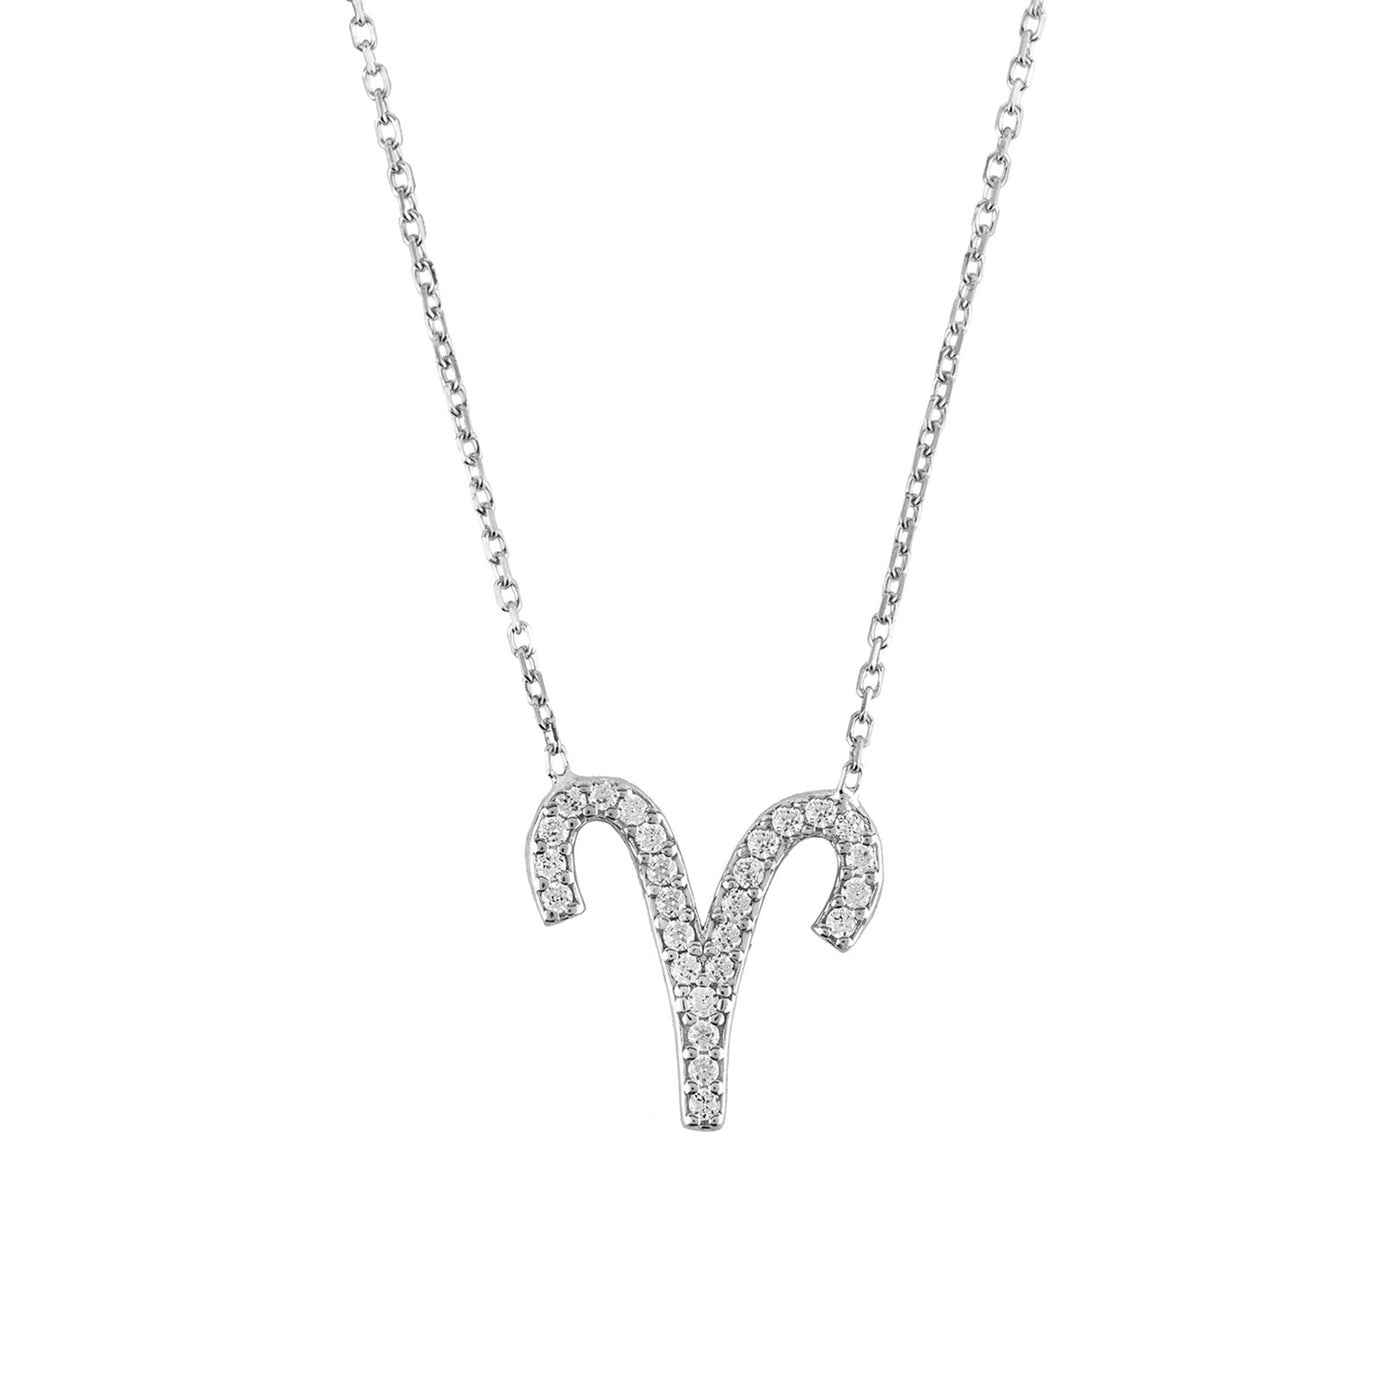 Aries - Necklace - 925 Sterling Silver - Zirconias